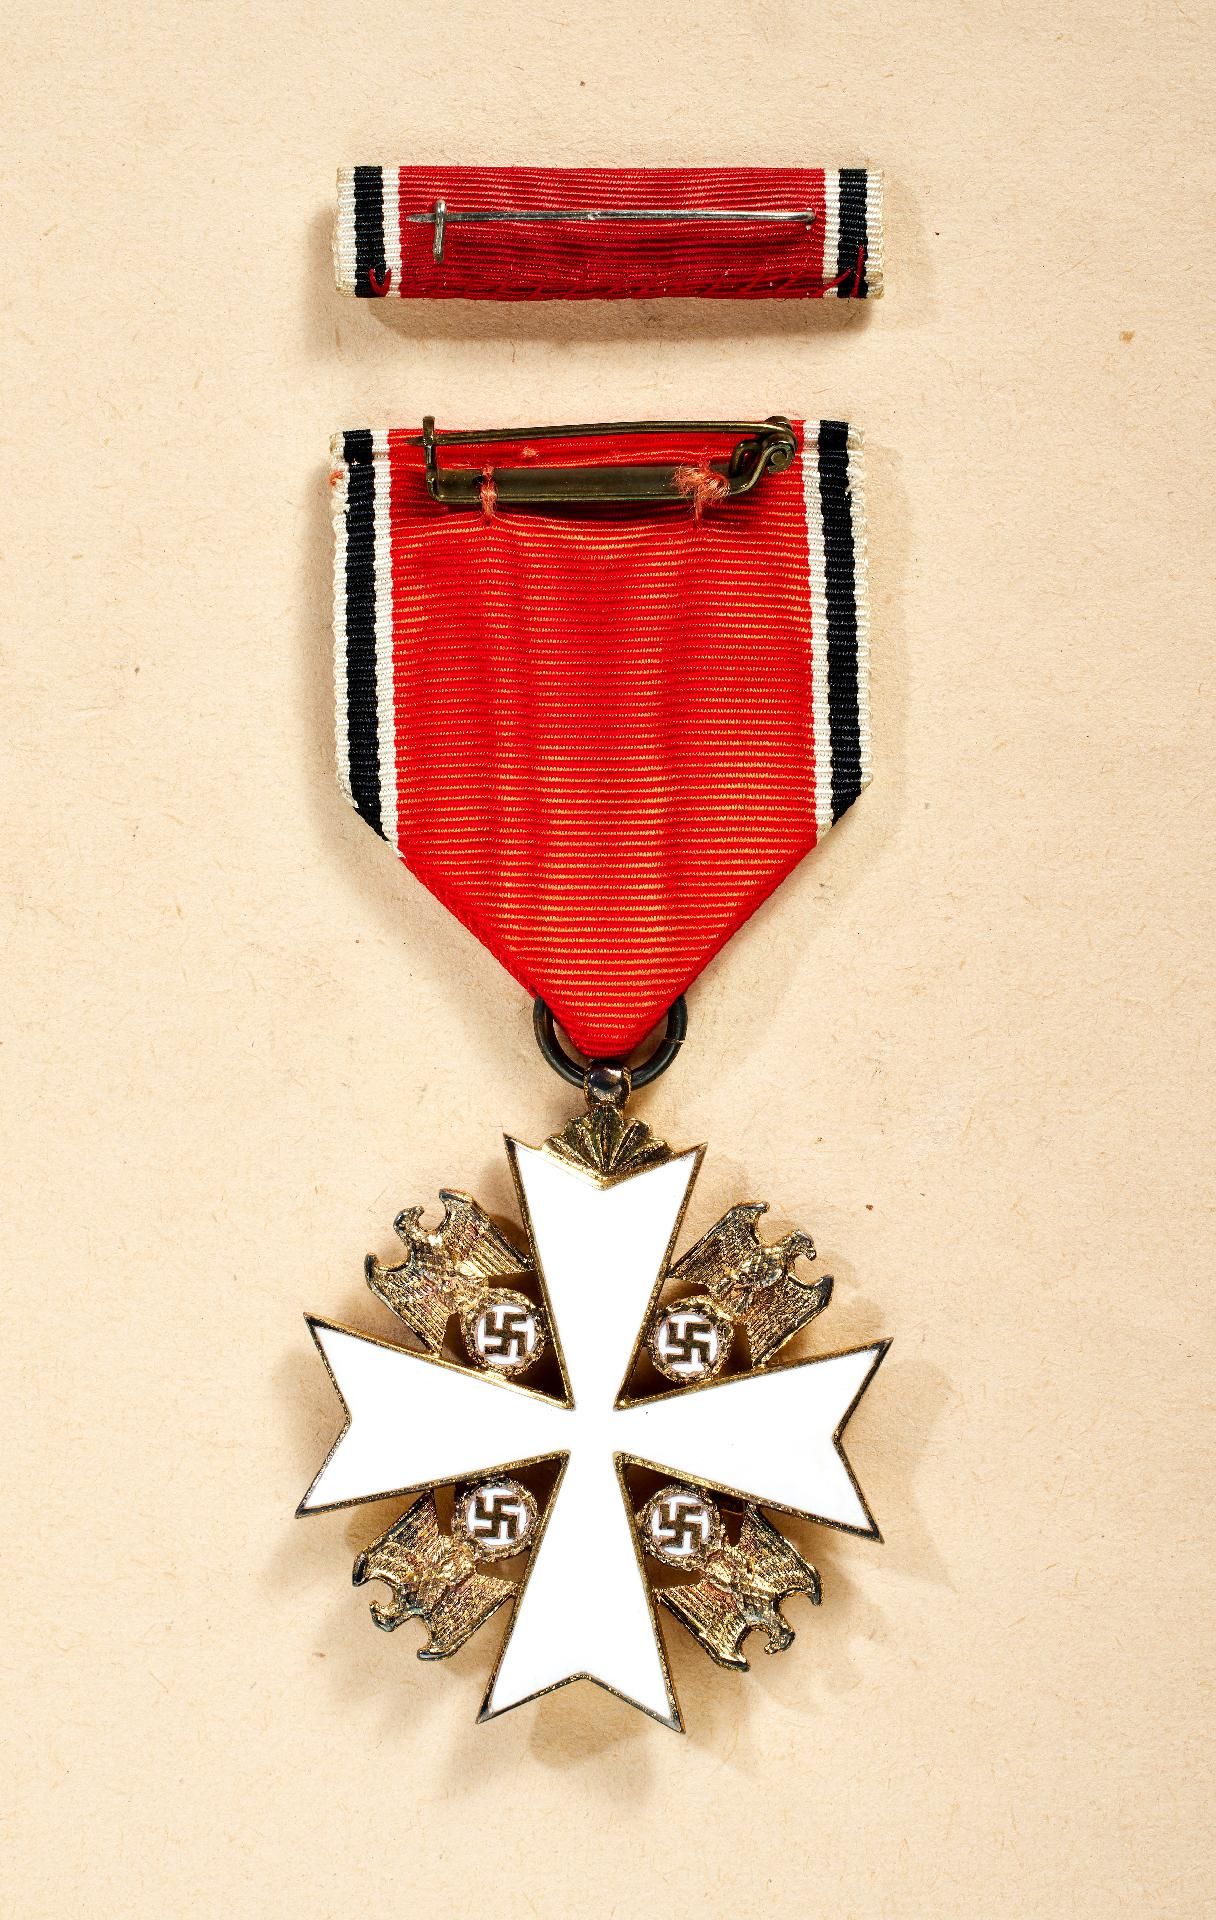 German Eagle Order : Order of the German Eagle: Cross of Merit III. level (5th class) with sword... - Image 4 of 4